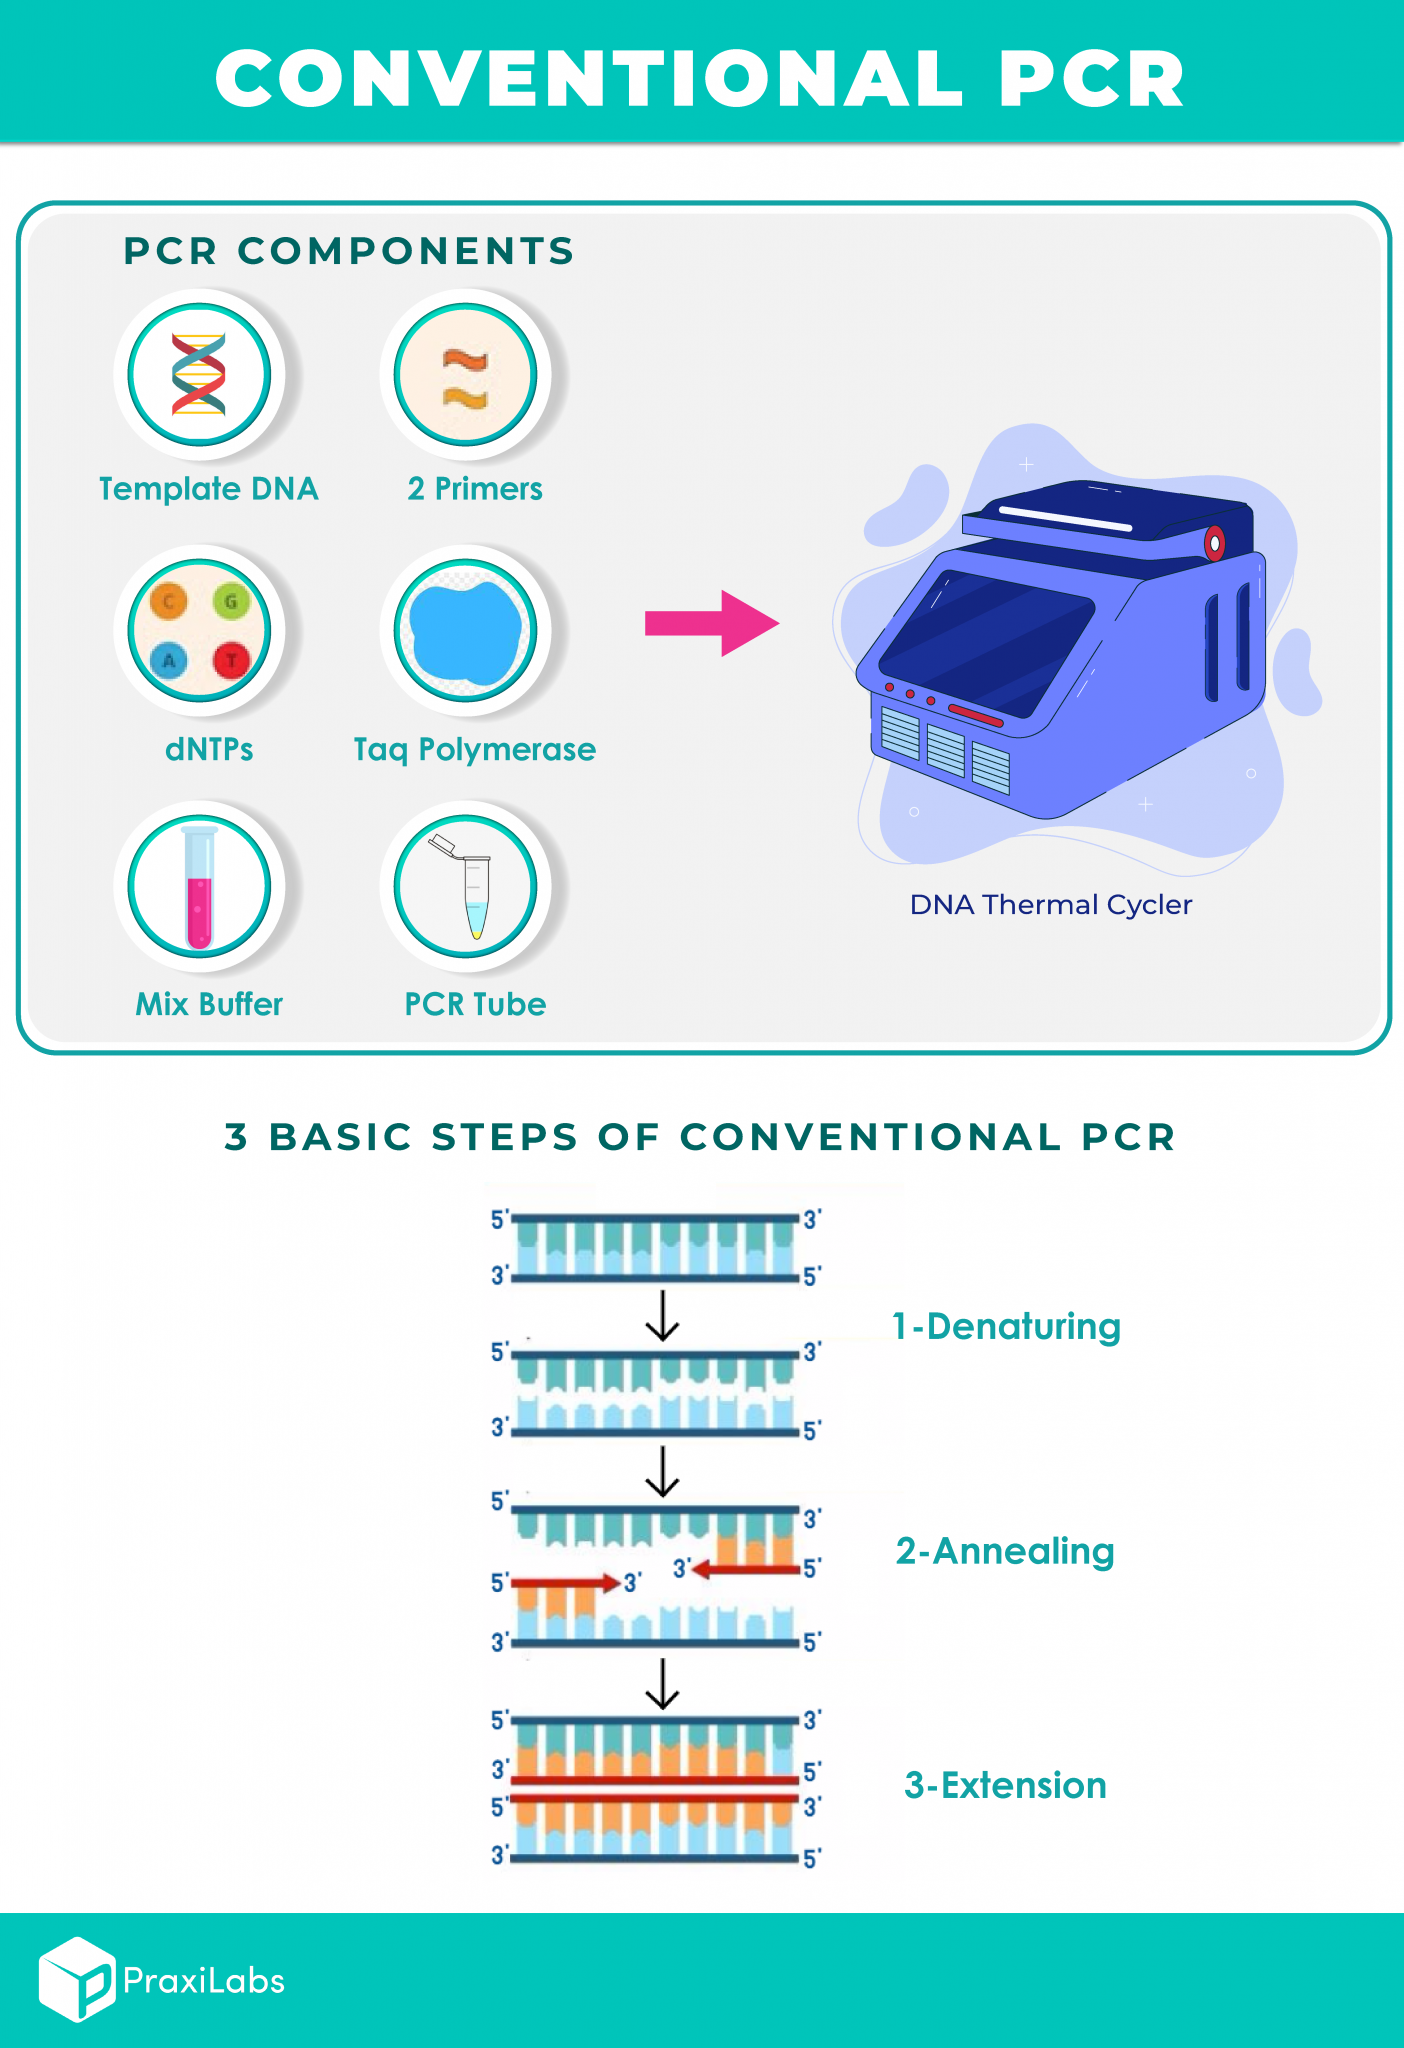 What Are The Three Basic Steps of Conventional PCR? PraxiLabs